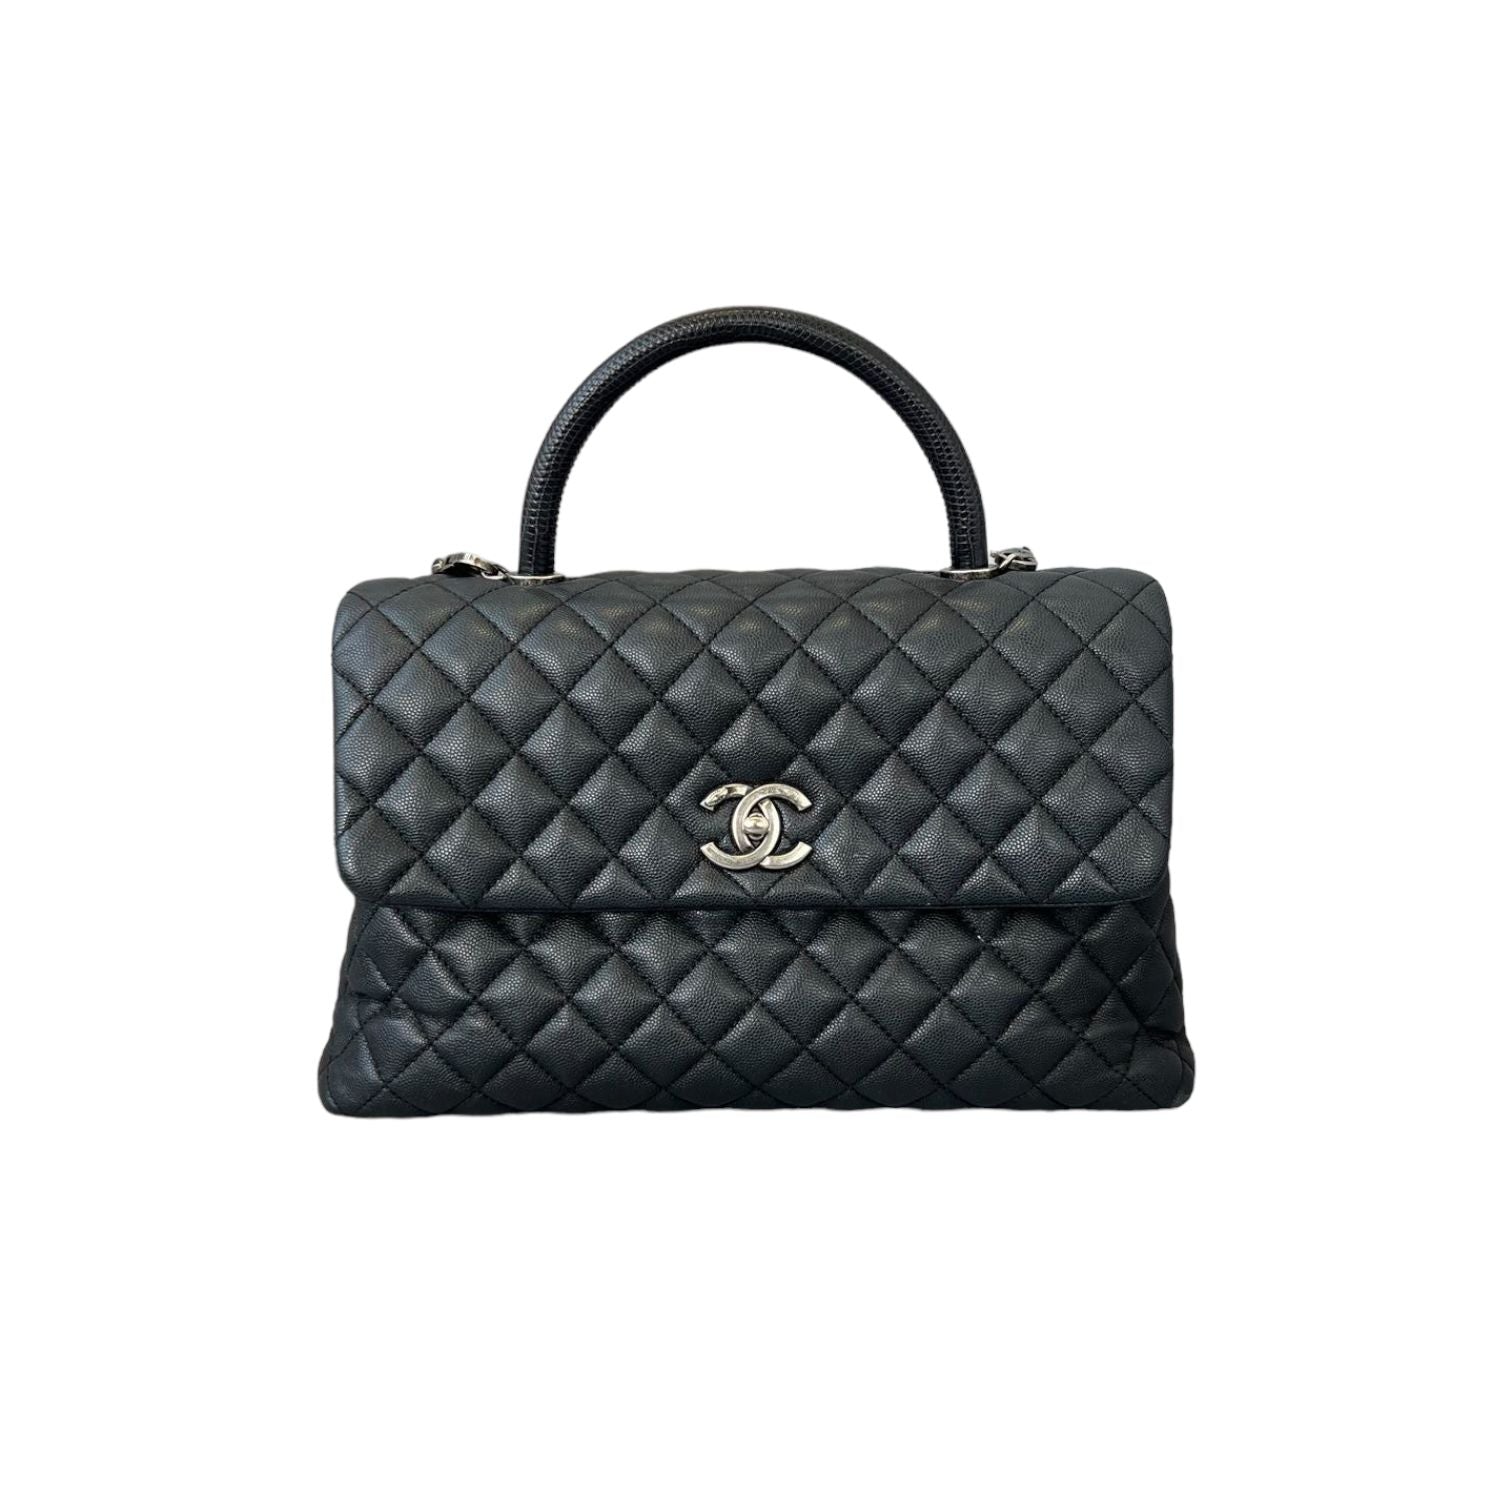 Shop CHANEL 2023 SS CHANEL ☆Rarge coco handle ☆Navy Blue by aamitene